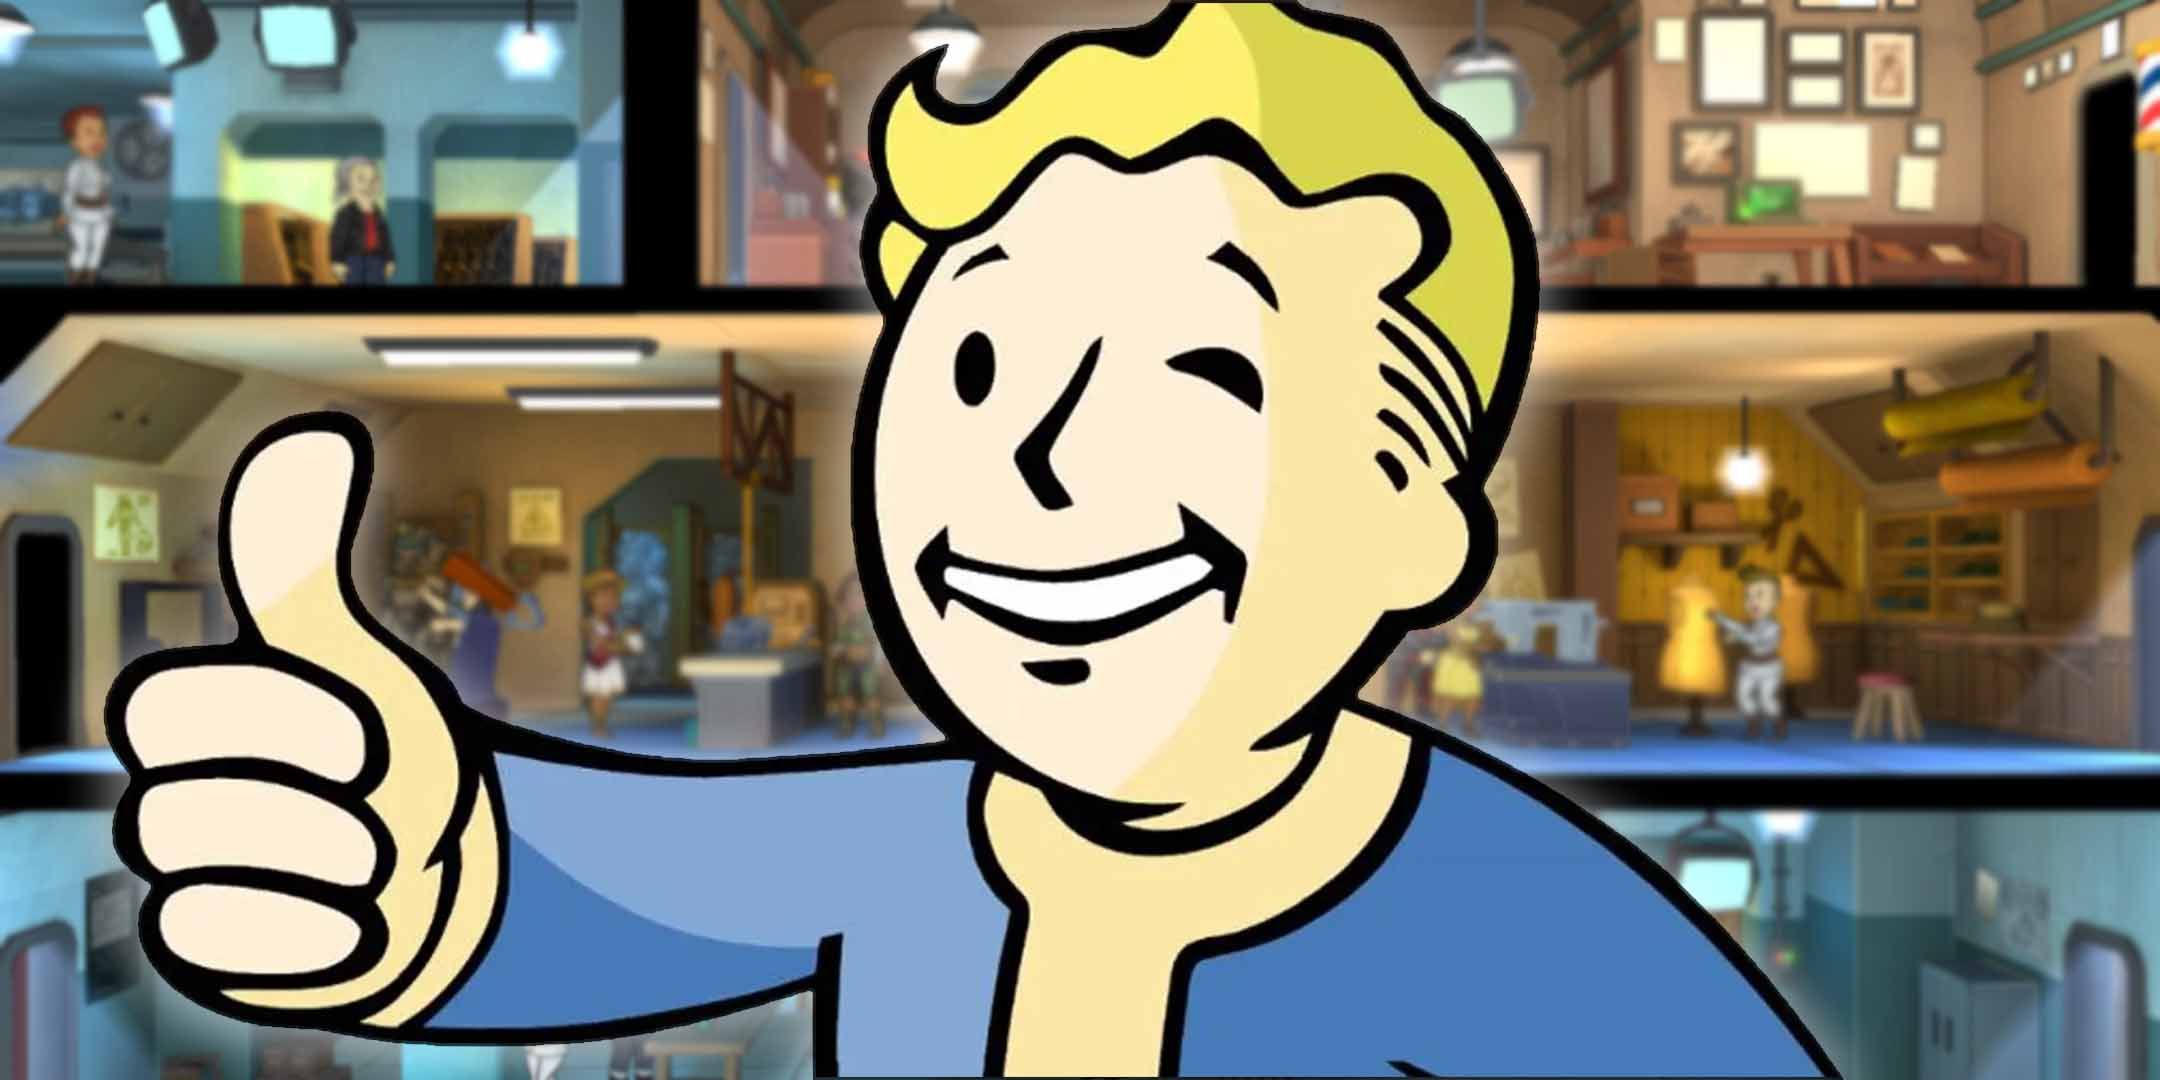 Fallout's Pipboy giving a thumbs up